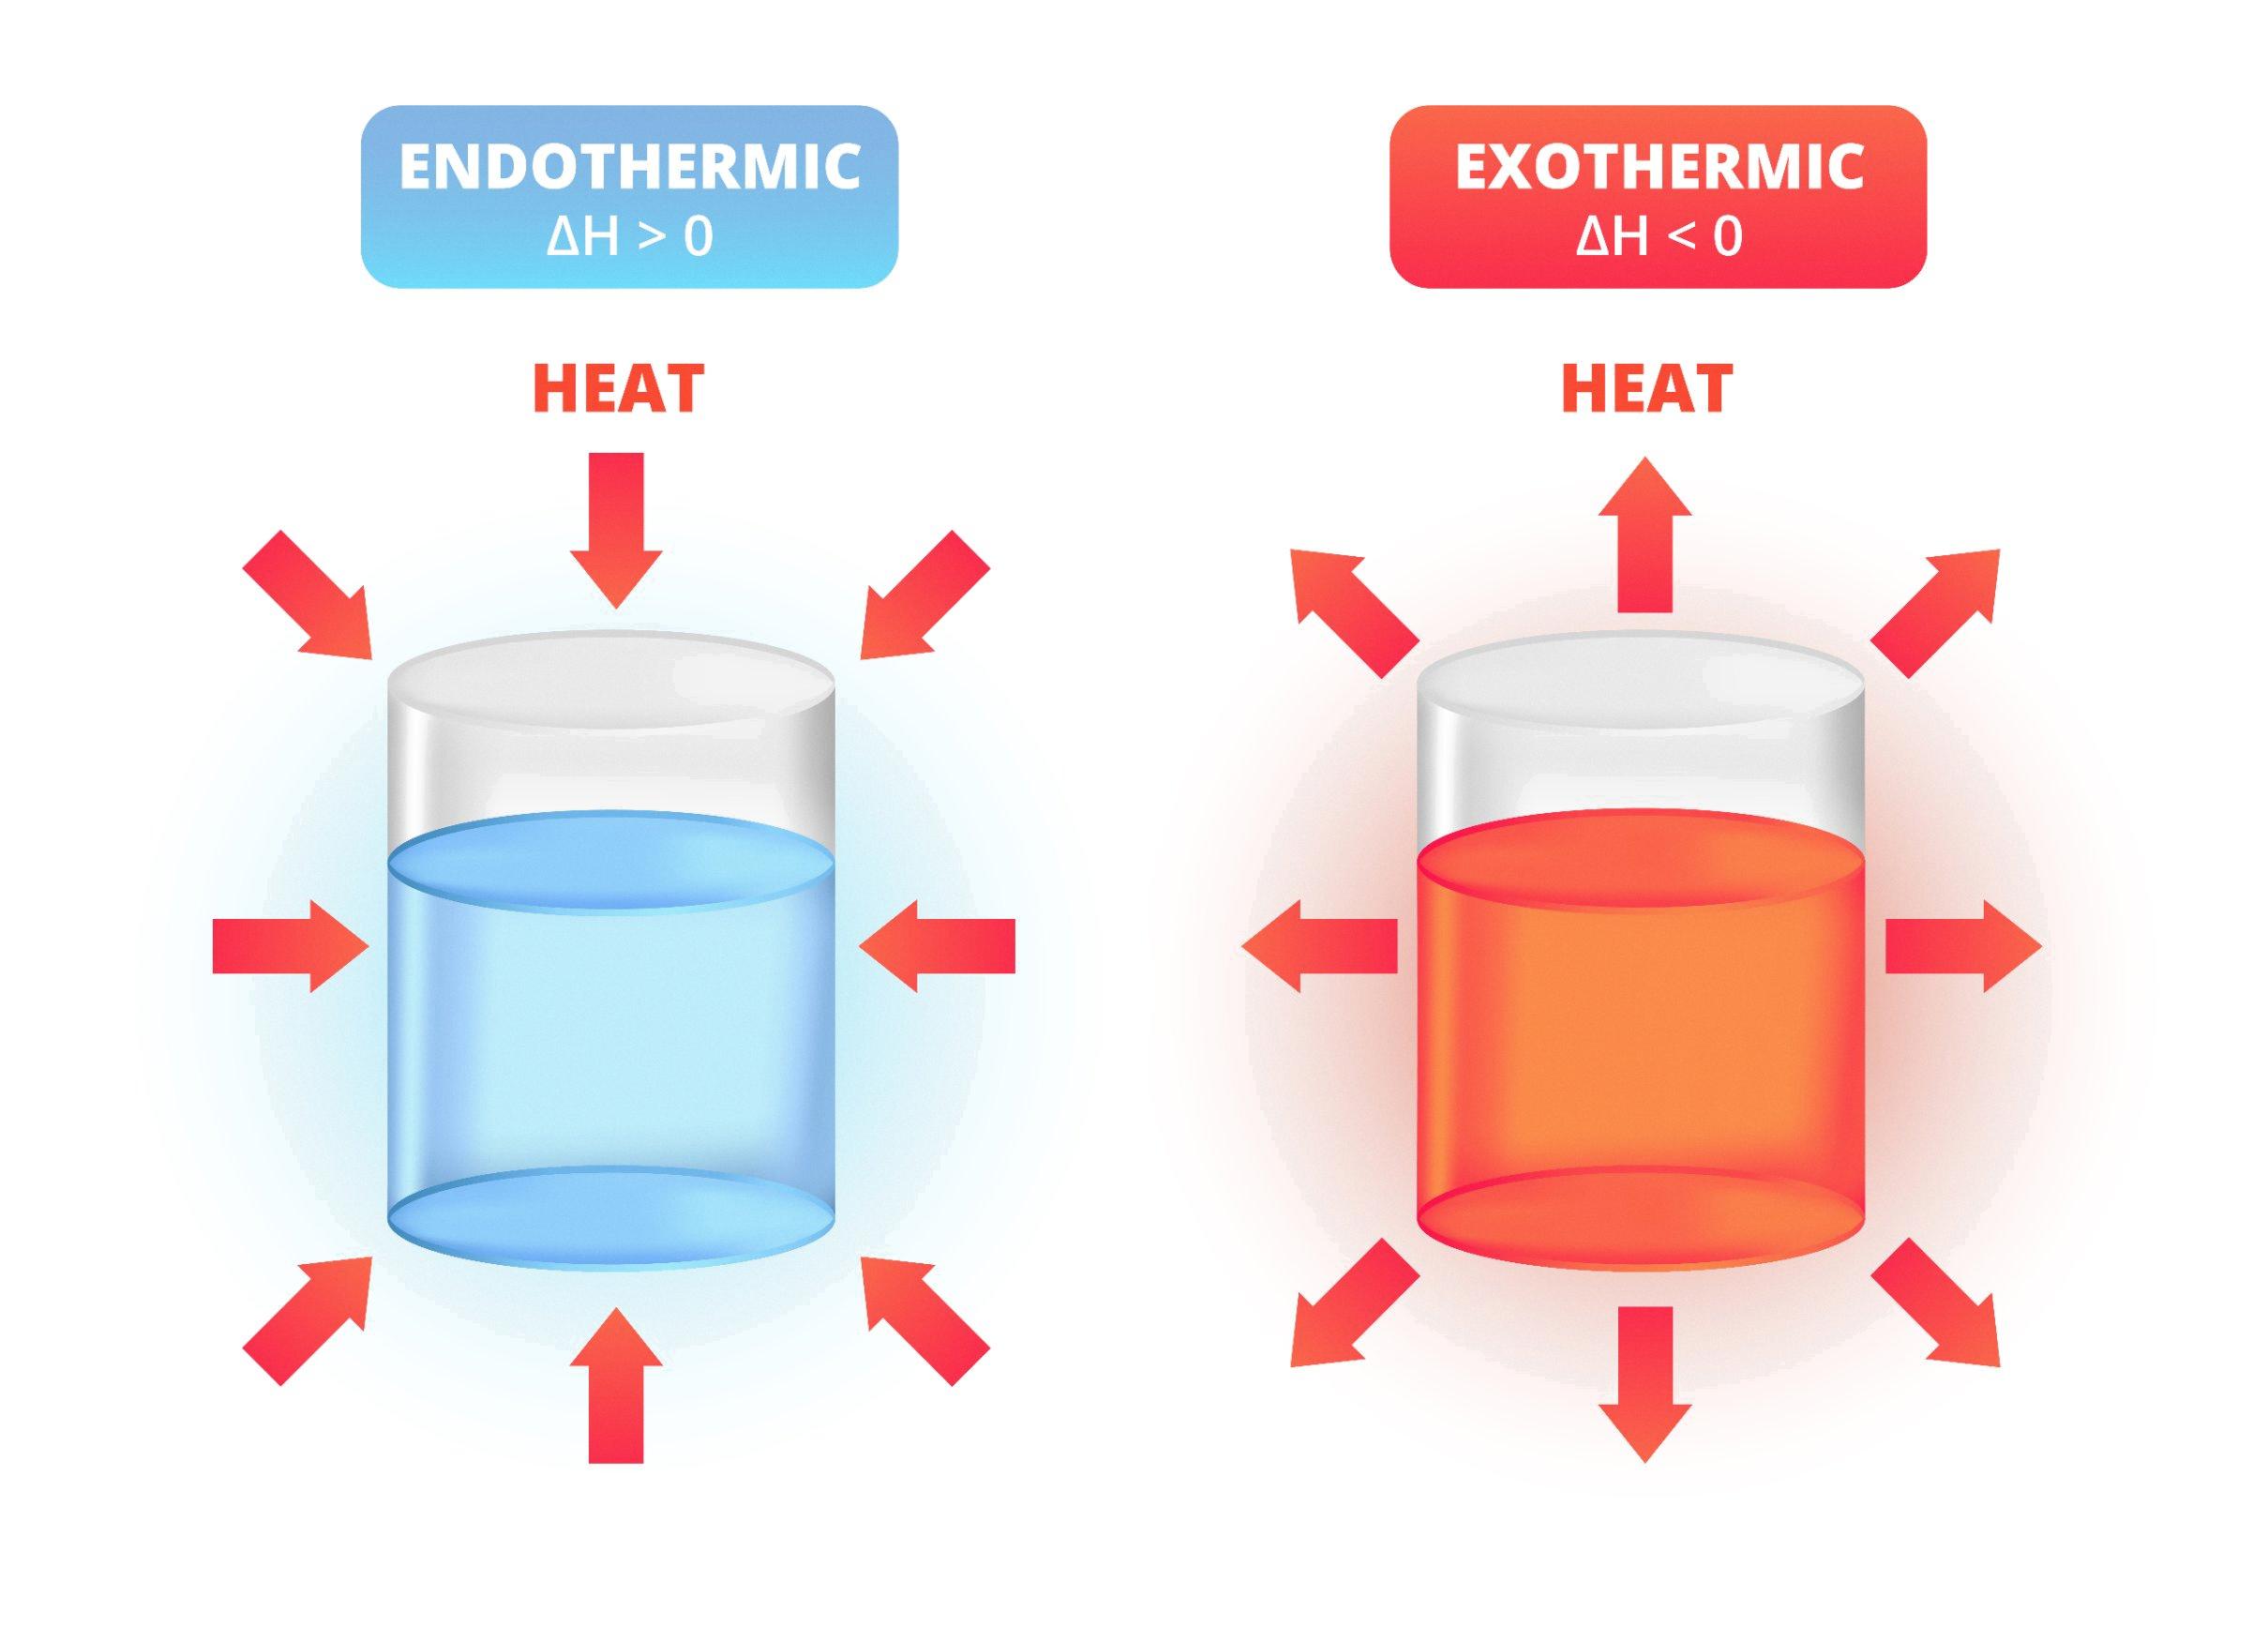 do endothermic reactions feel cold